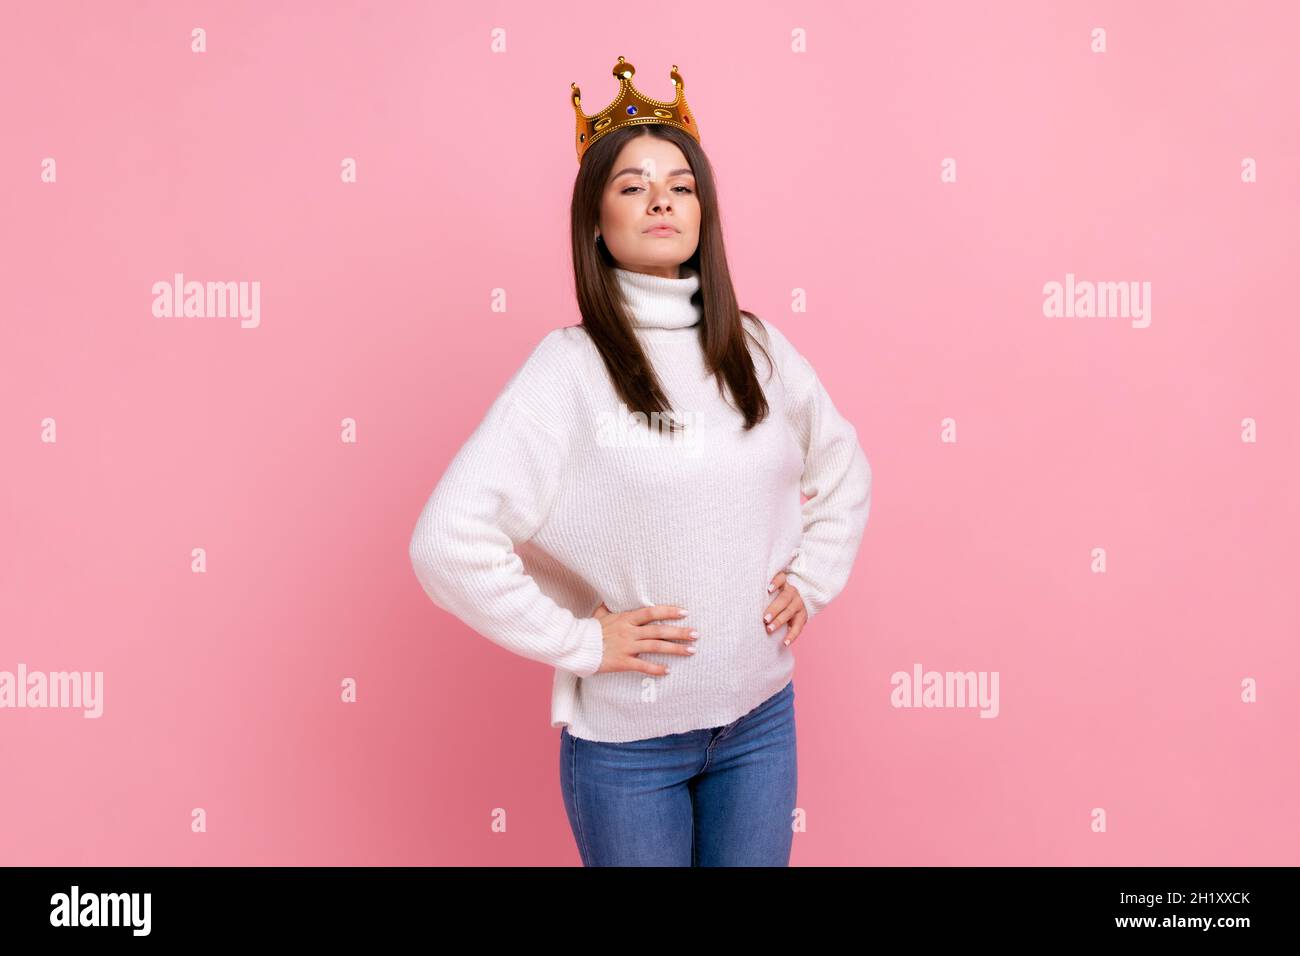 Young female with crown on head, self confidence in success, self-motivation and dreams to be best, wearing white casual style sweater. Indoor studio shot isolated on pink background. Stock Photo